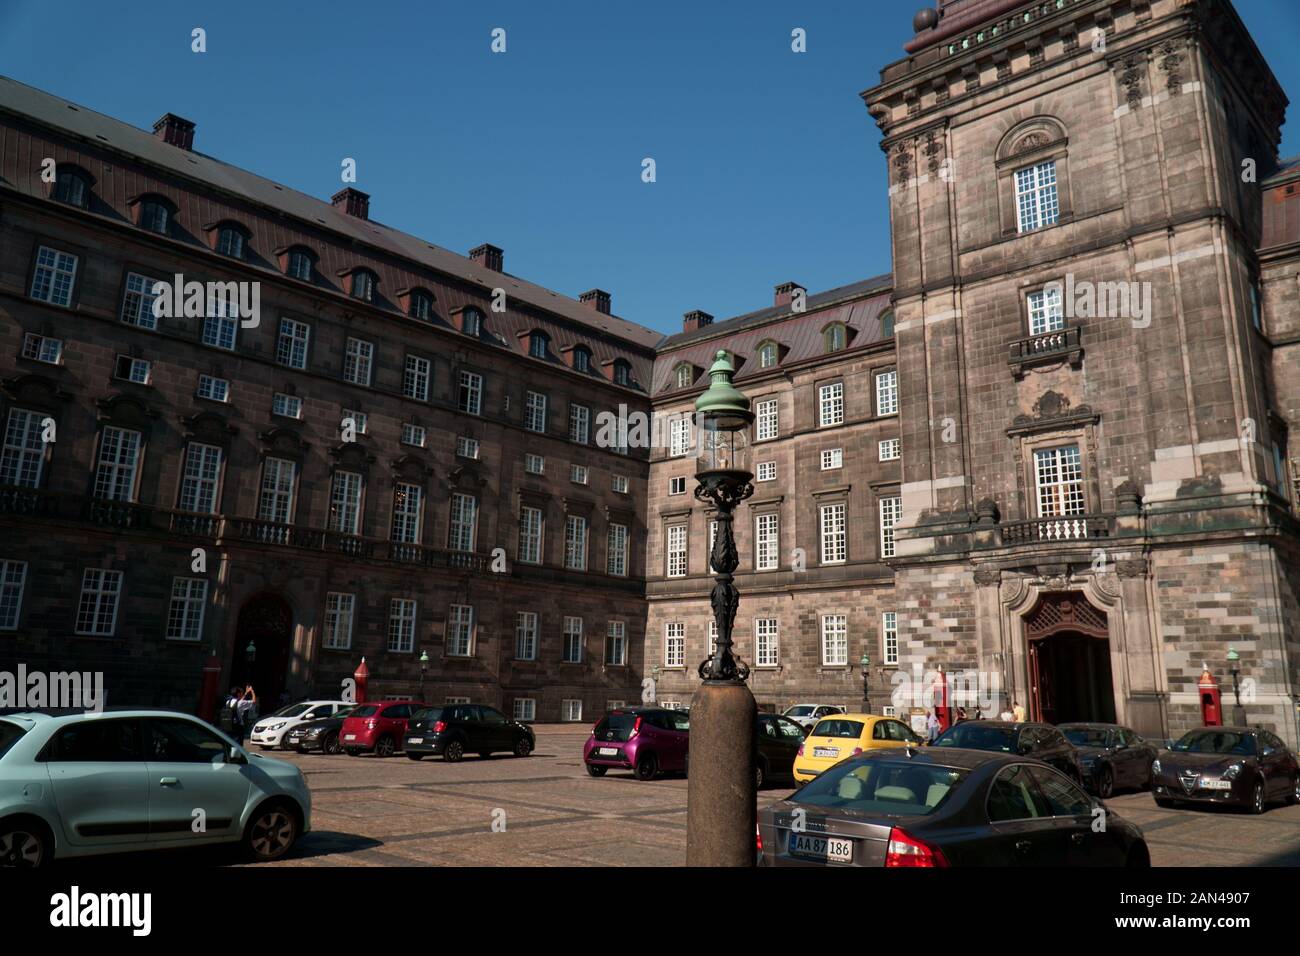 Christiansborg Slot, a palace and government building in Copenhagen, Denmark Stock Photo